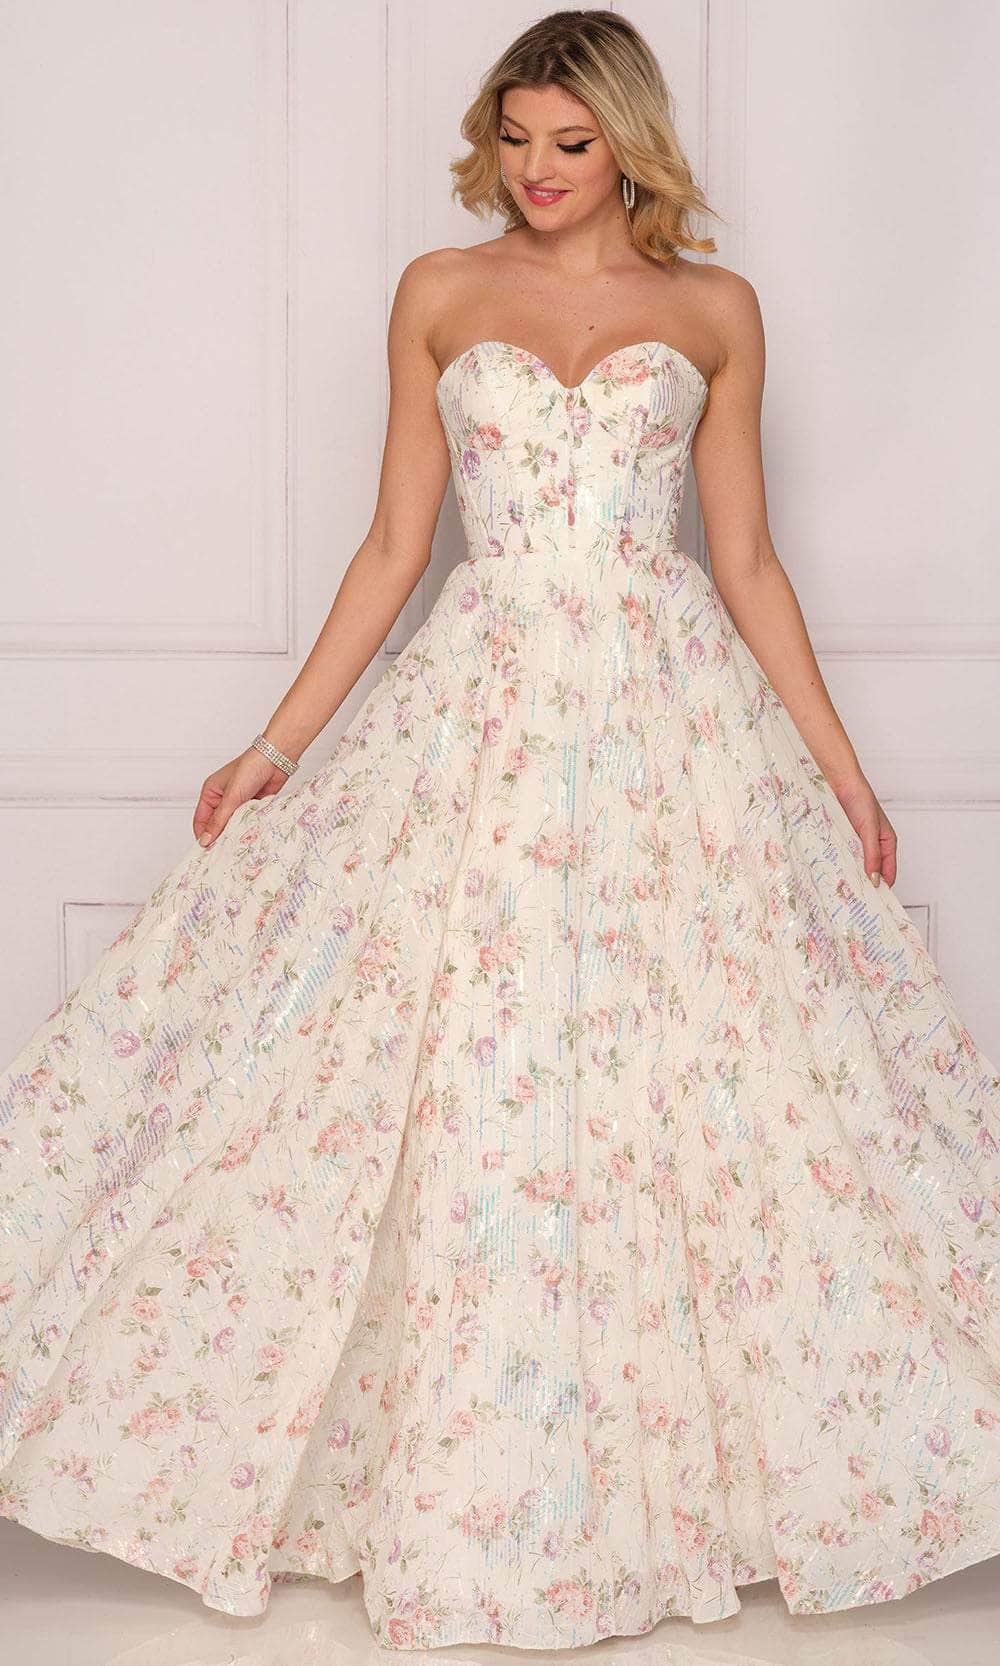 Image of Dave & Johnny A10391 - Strapless Floral Printed Prom Dress